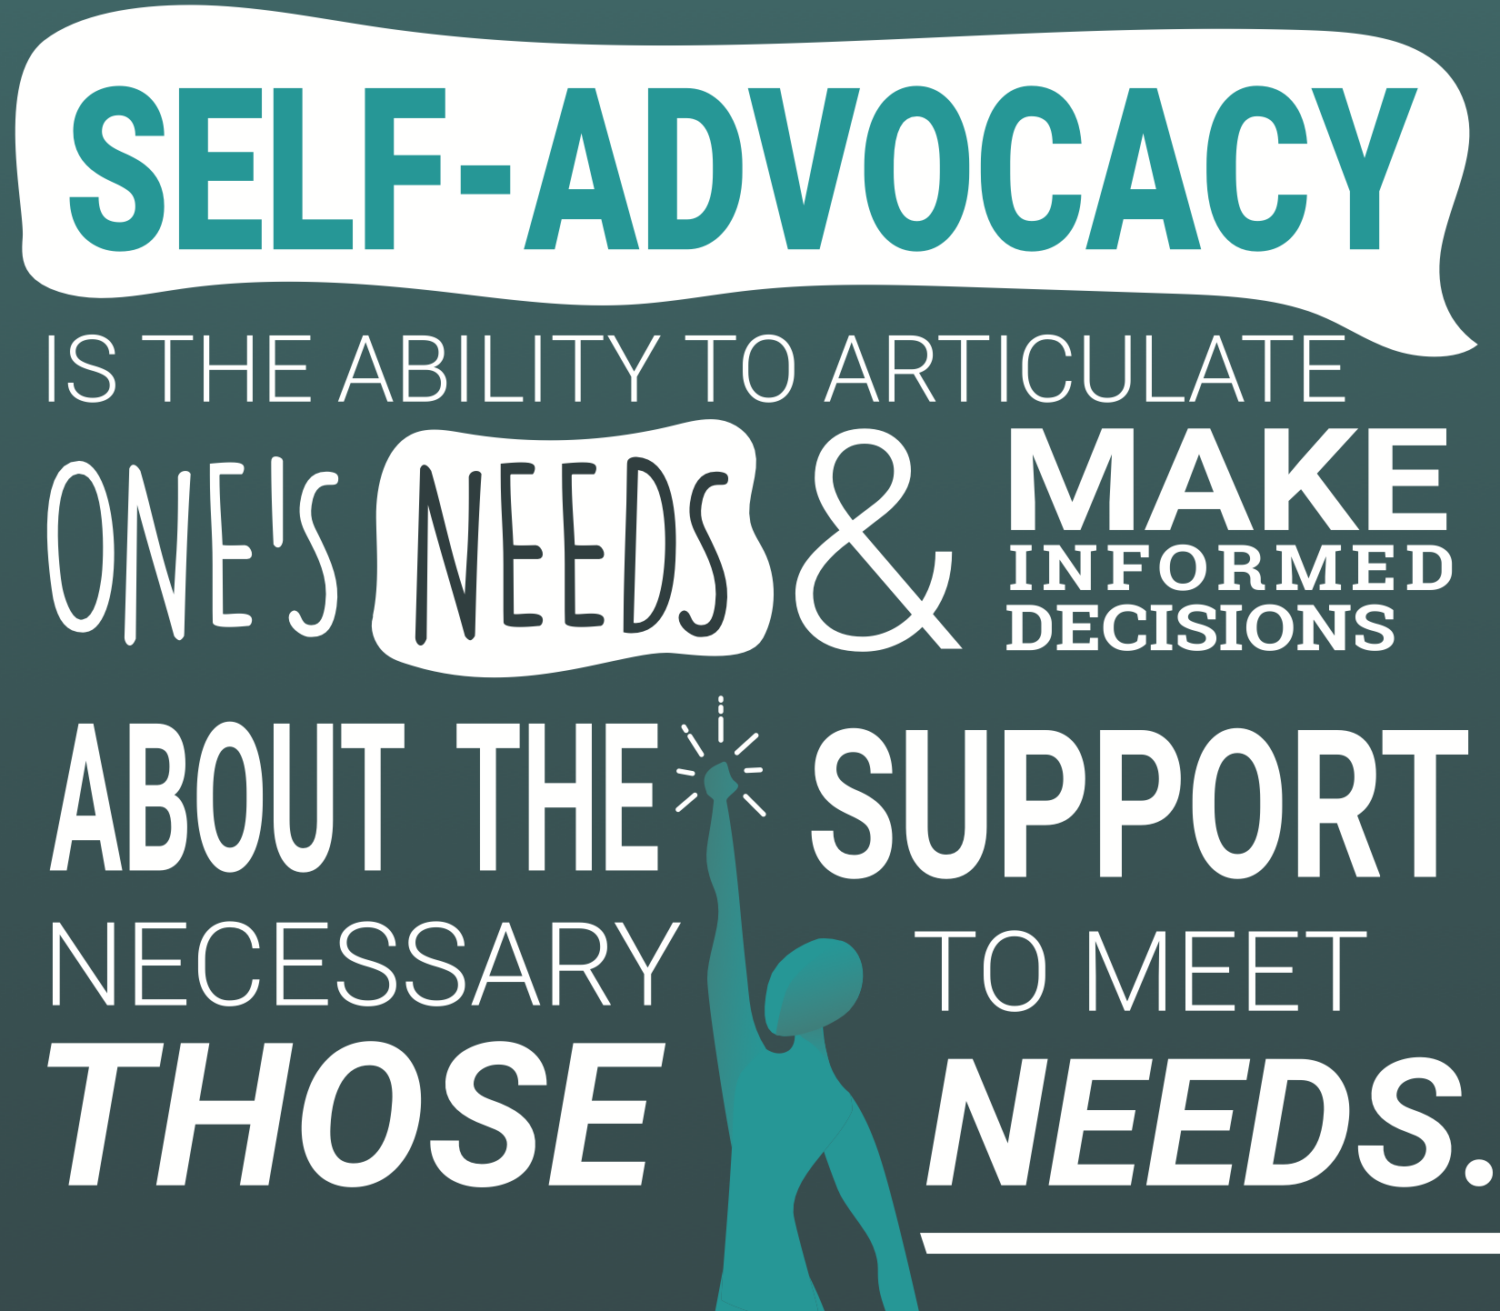 The image contains the following content: "SELF-ADVOCACY IS THE ABILITY TO ARTICULATE ONE'S NEEDS & MAKE INFORMED DECISIONS ABOUT THE SUPPORT NECESSARY TO MEET THOSE NEEDS." The image also has the tags: text, font, poster, graphic design, graphics, printing, typography, design.